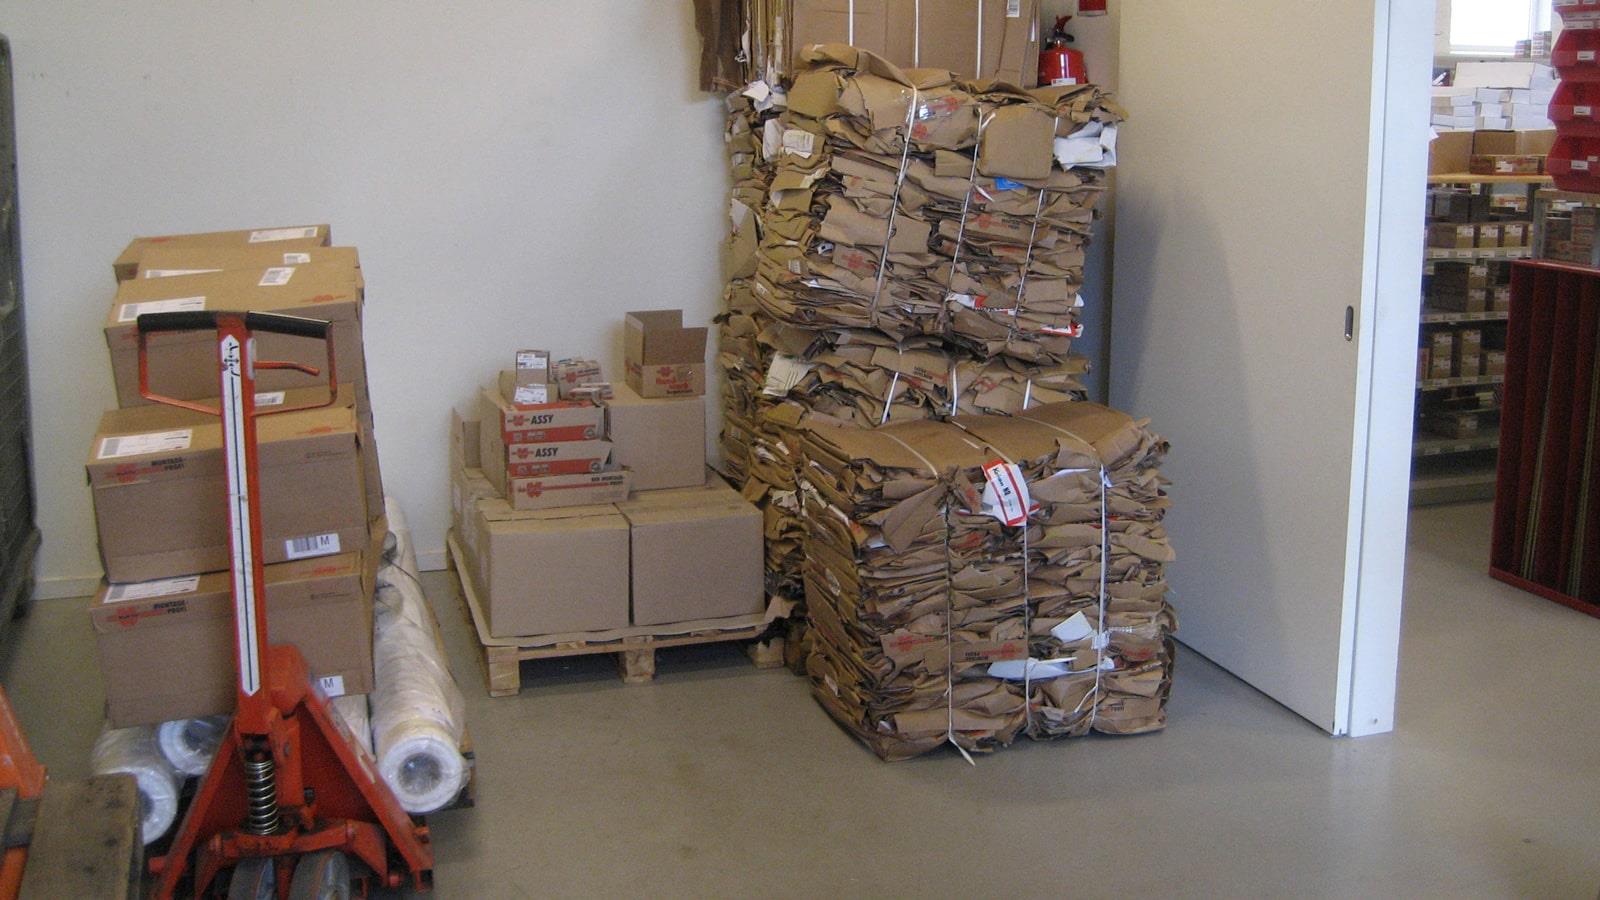 Compacted cardboard bales and boxes with goods in Würth warehouse